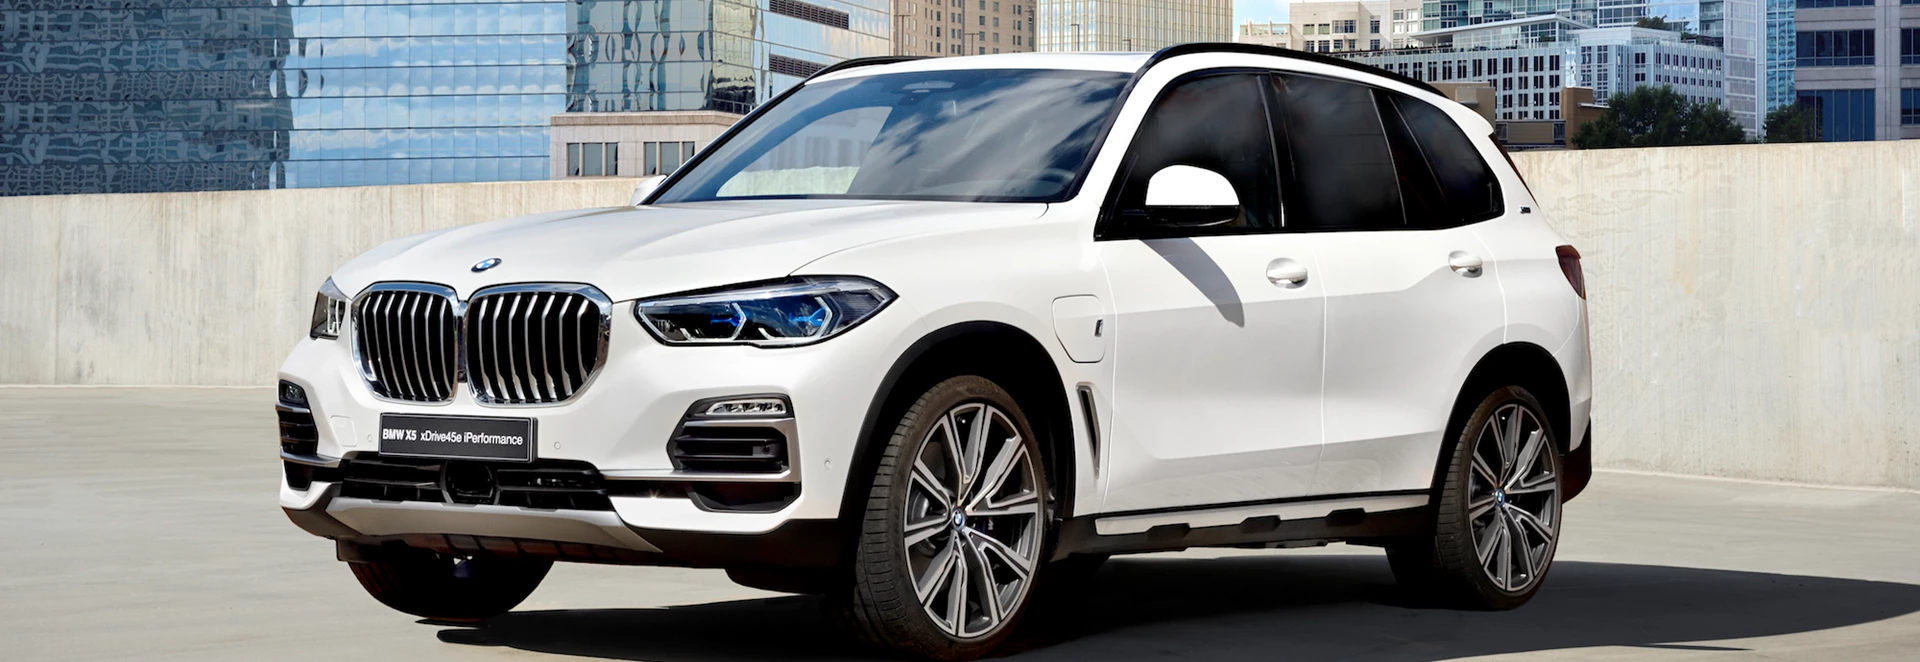 BMW unveils electrified version of X5 